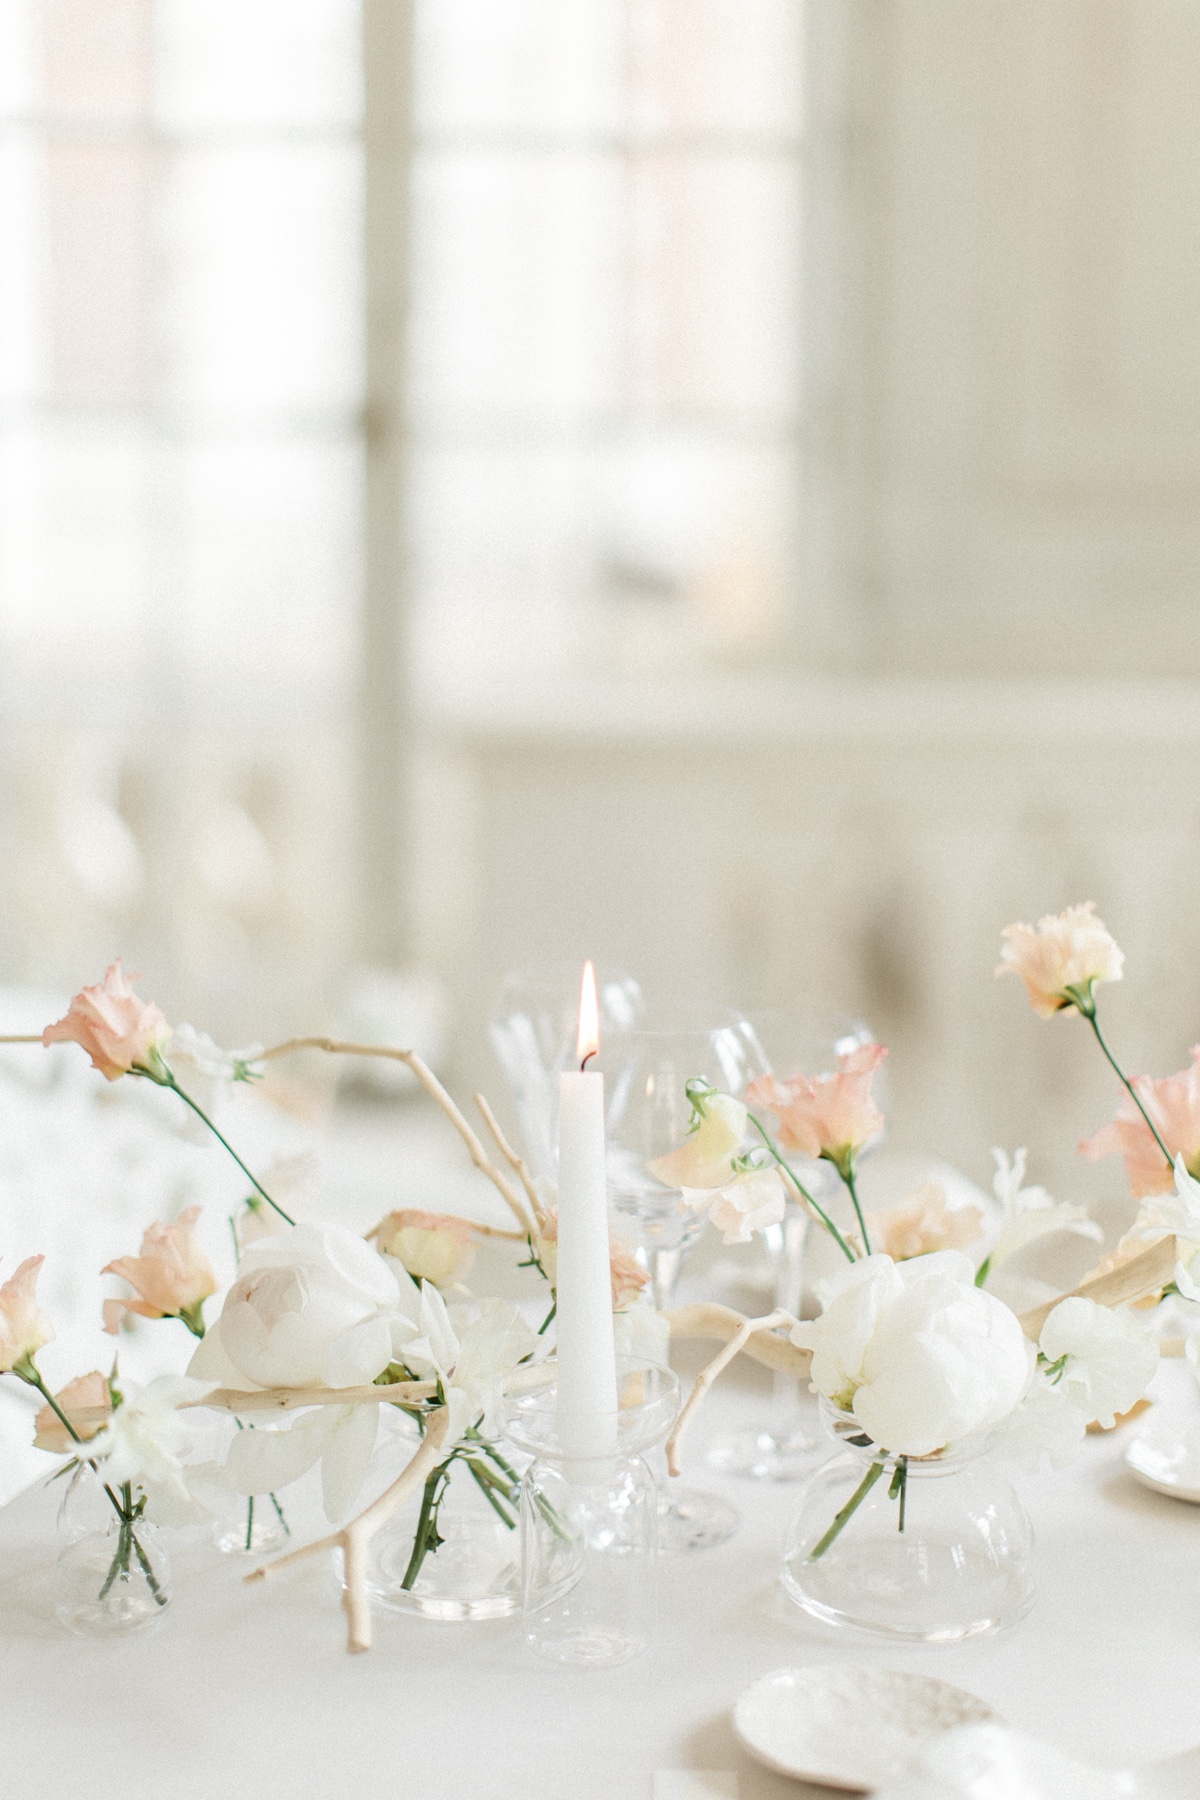 Whimsical Styled Shoot In An Enchanted ChÃ¢teau